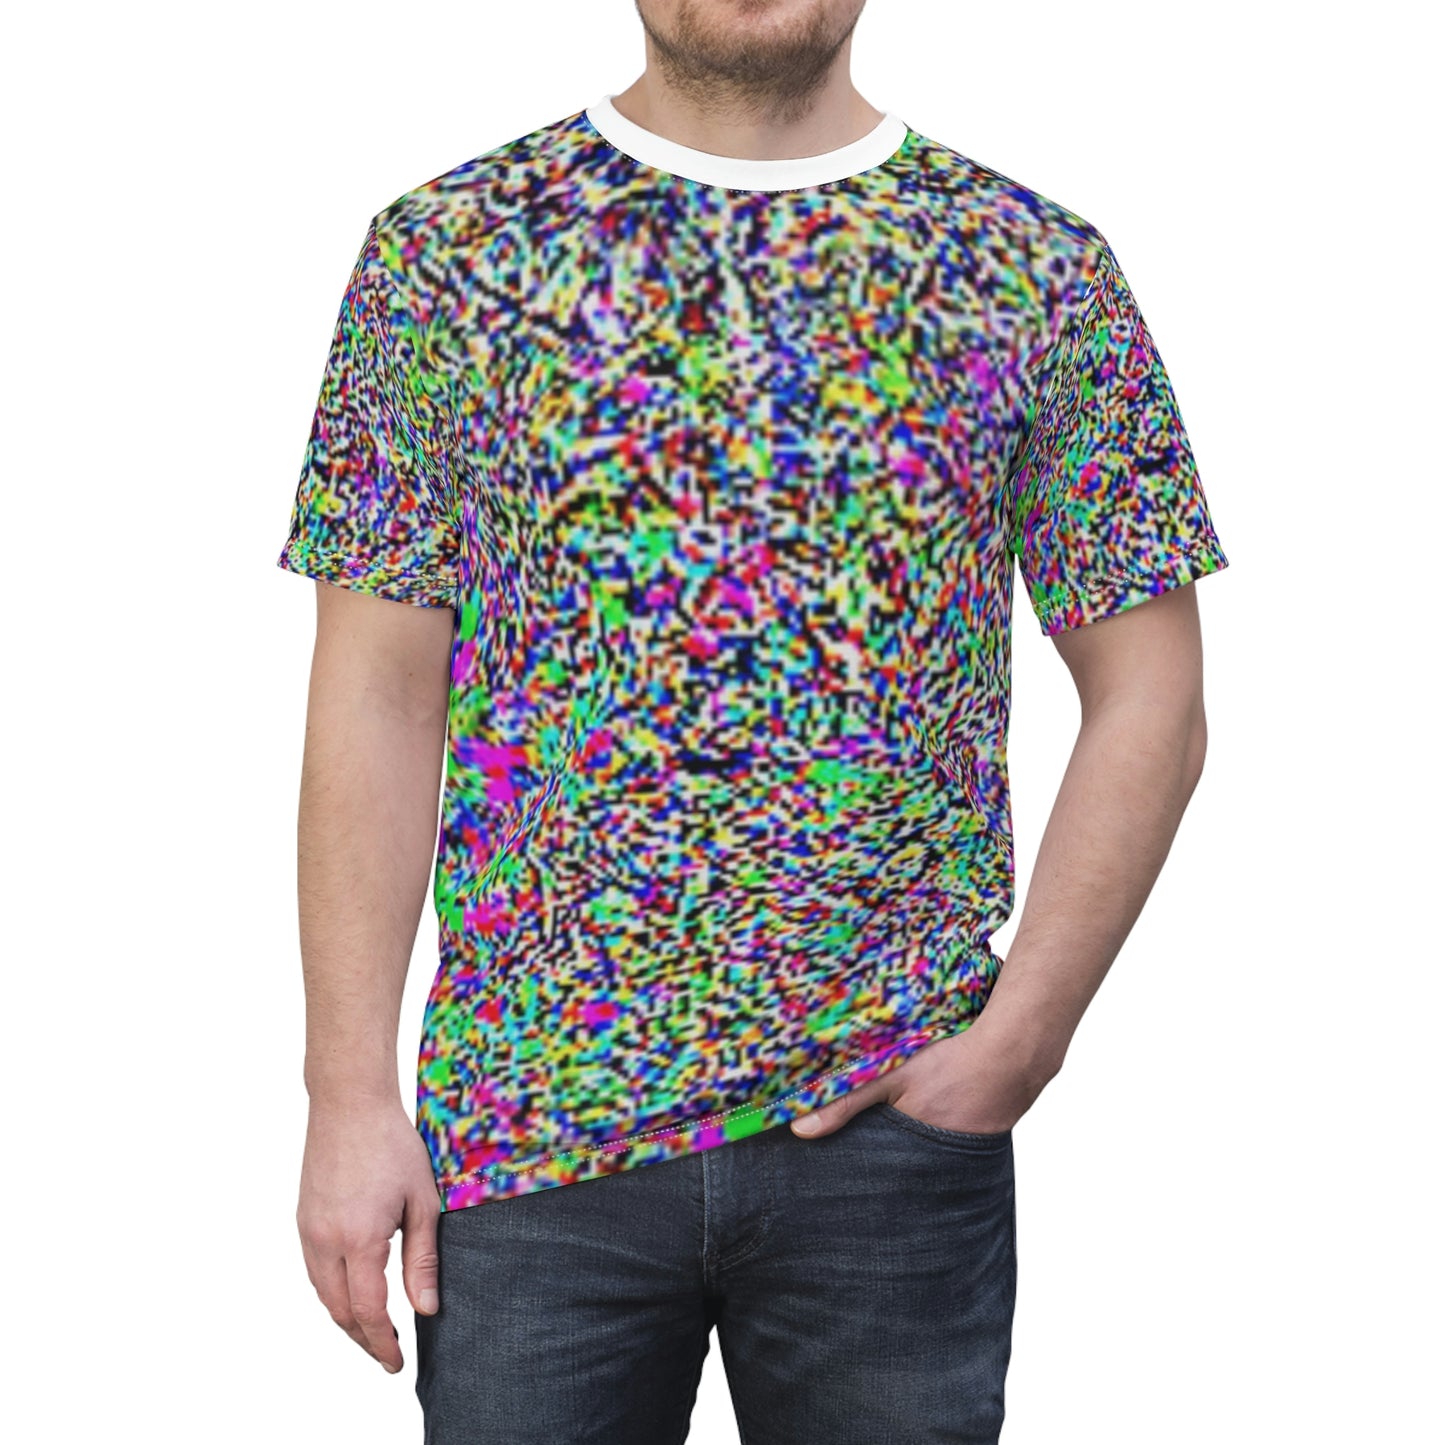 Anti Facial Recognition AI Invisibility Adversarial Pattern Unisex Tee